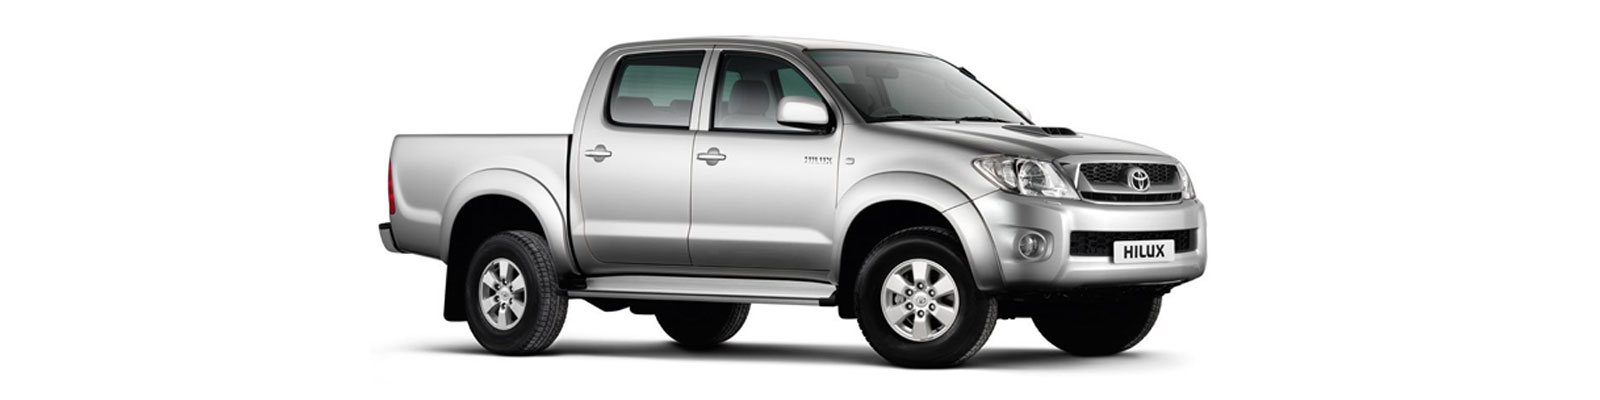 Accessories for Toyota Hilux Double Cab 2009-2011